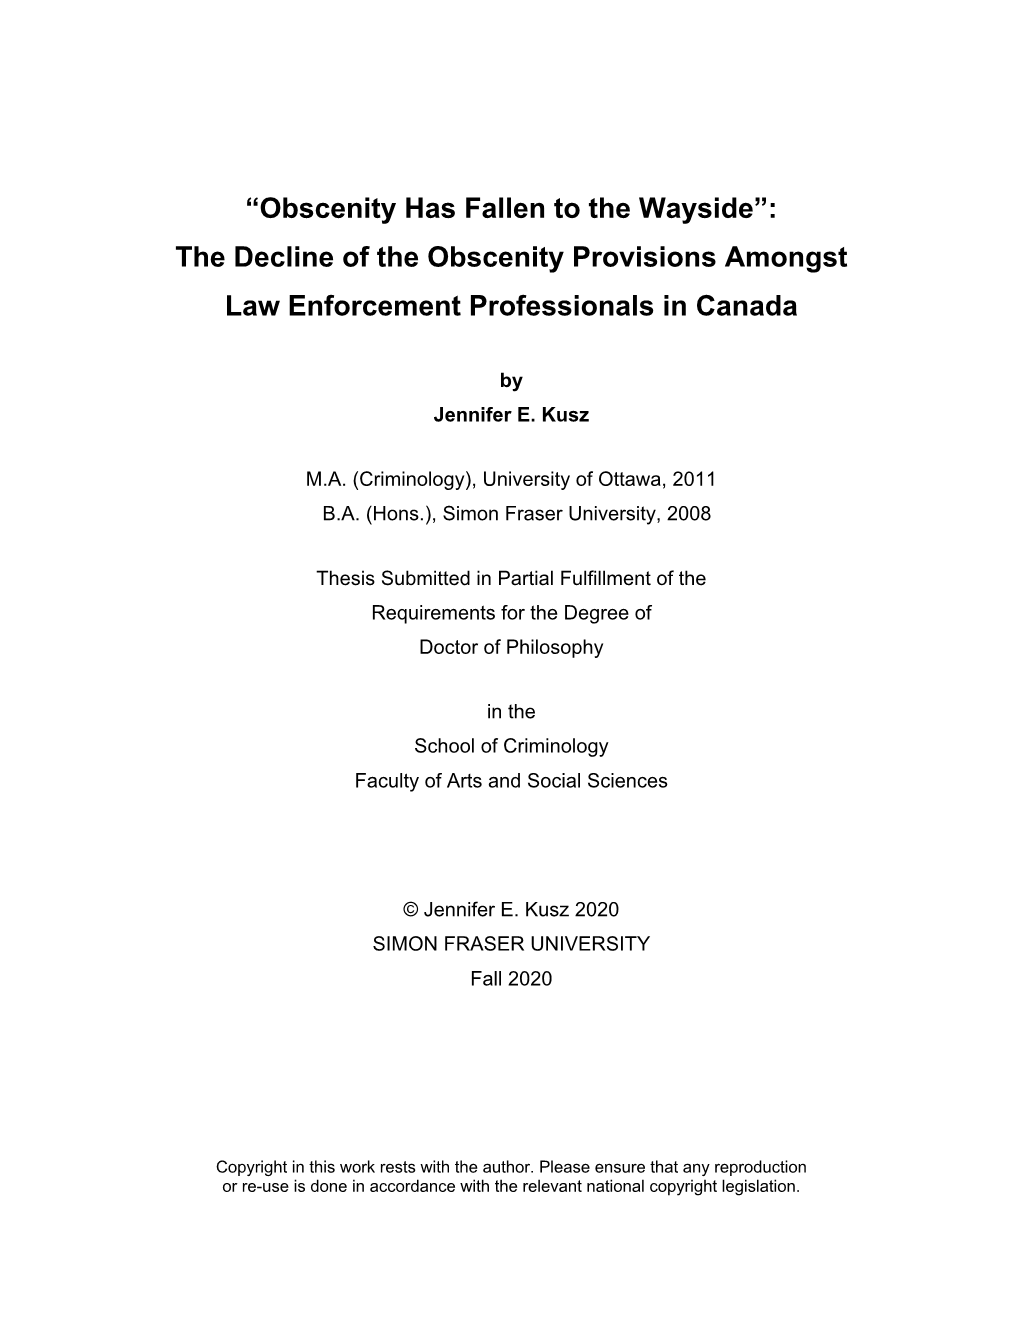 Obscenity Has Fallen to the Wayside”: the Decline of the Obscenity Provisions Amongst Law Enforcement Professionals in Canada